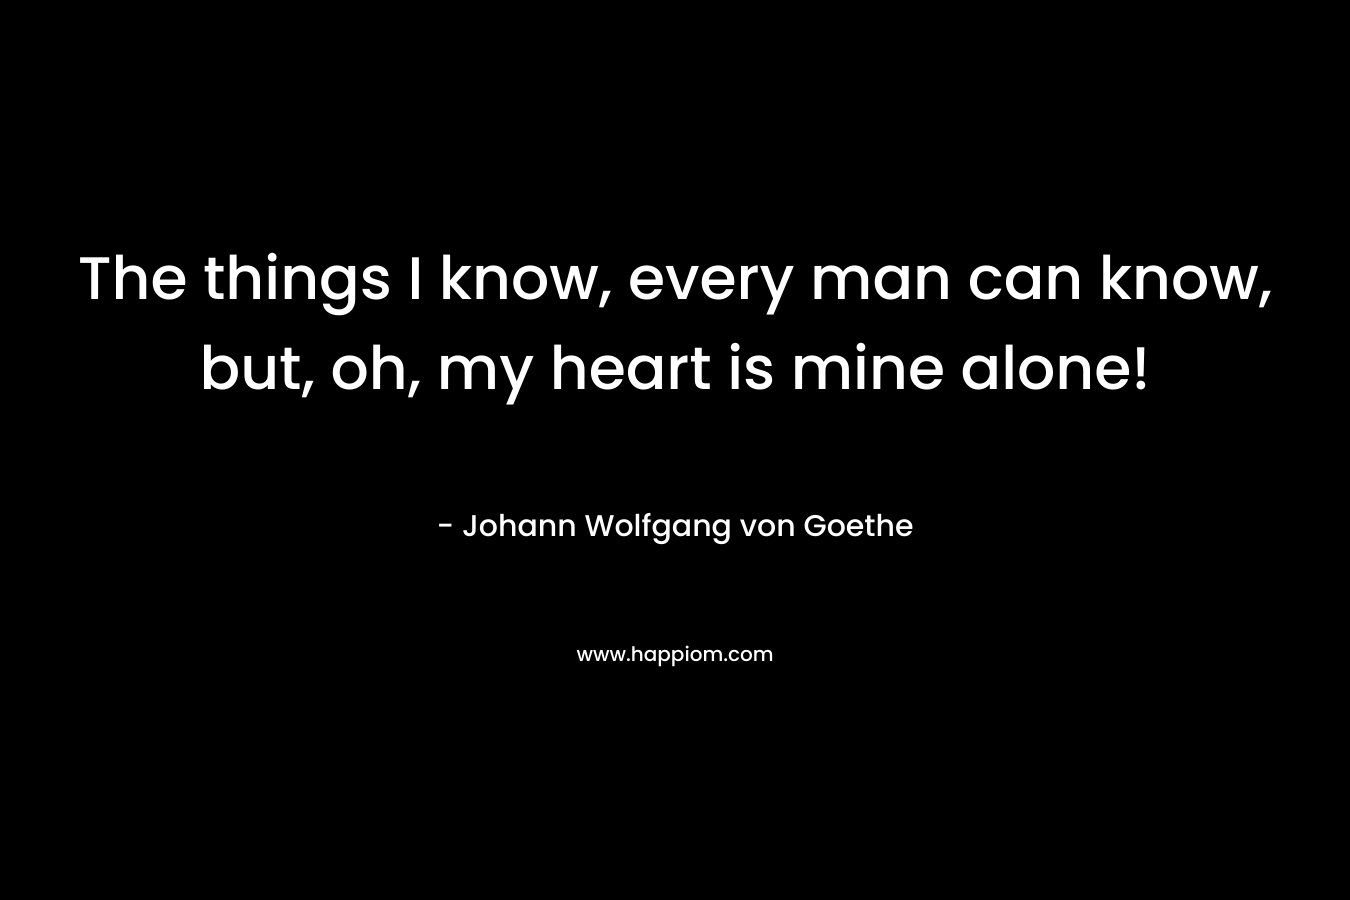 The things I know, every man can know, but, oh, my heart is mine alone! – Johann Wolfgang von Goethe